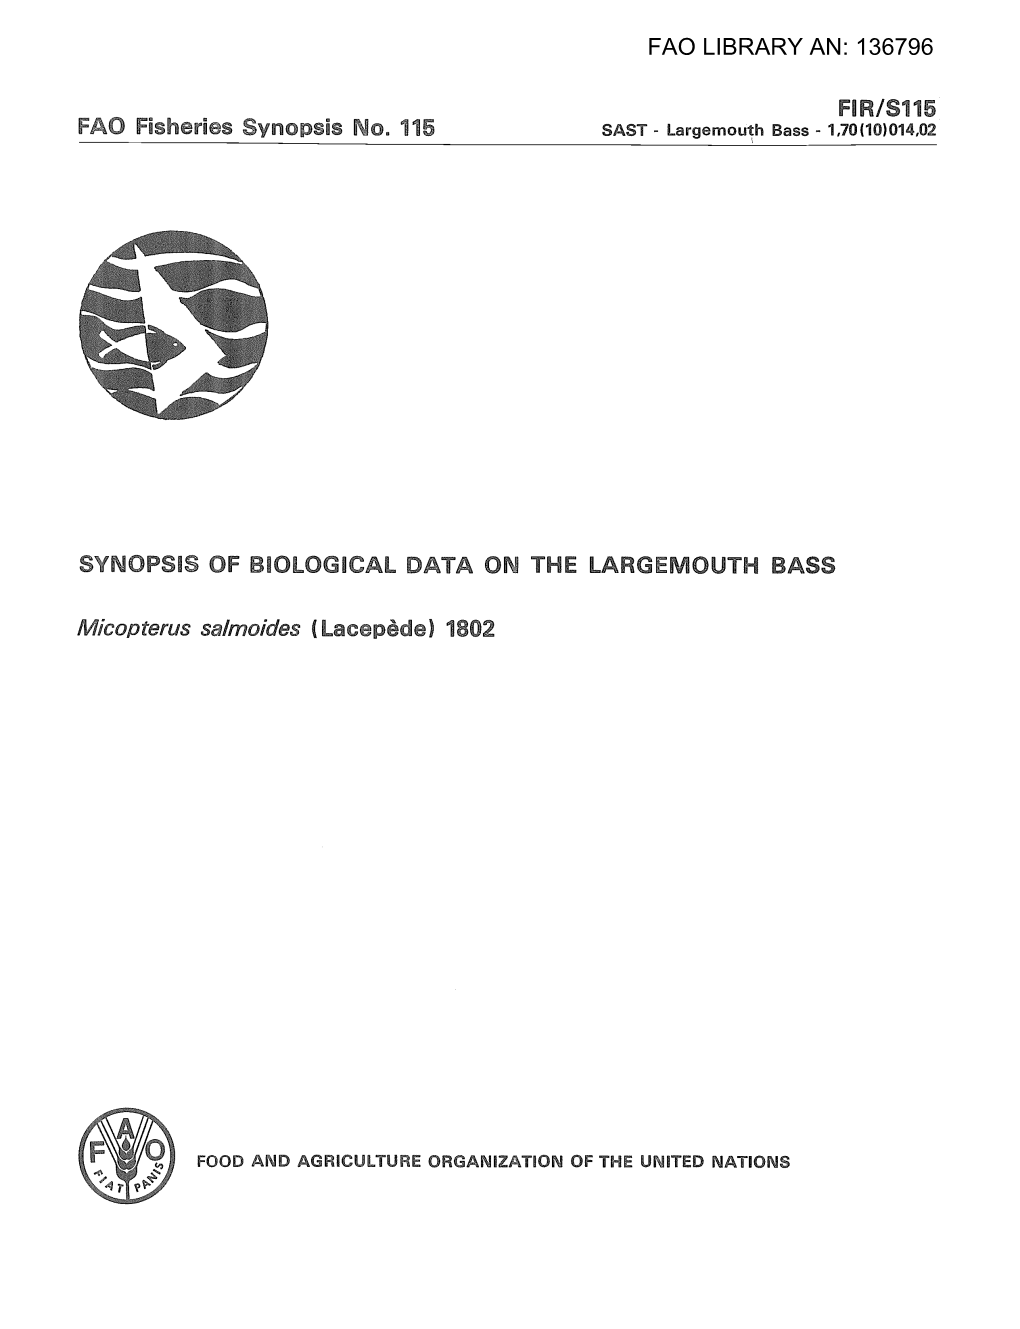 Synopsis of Biological Data on the Largemouth Bass Micropterus Salmoides (Lacepede) 1802